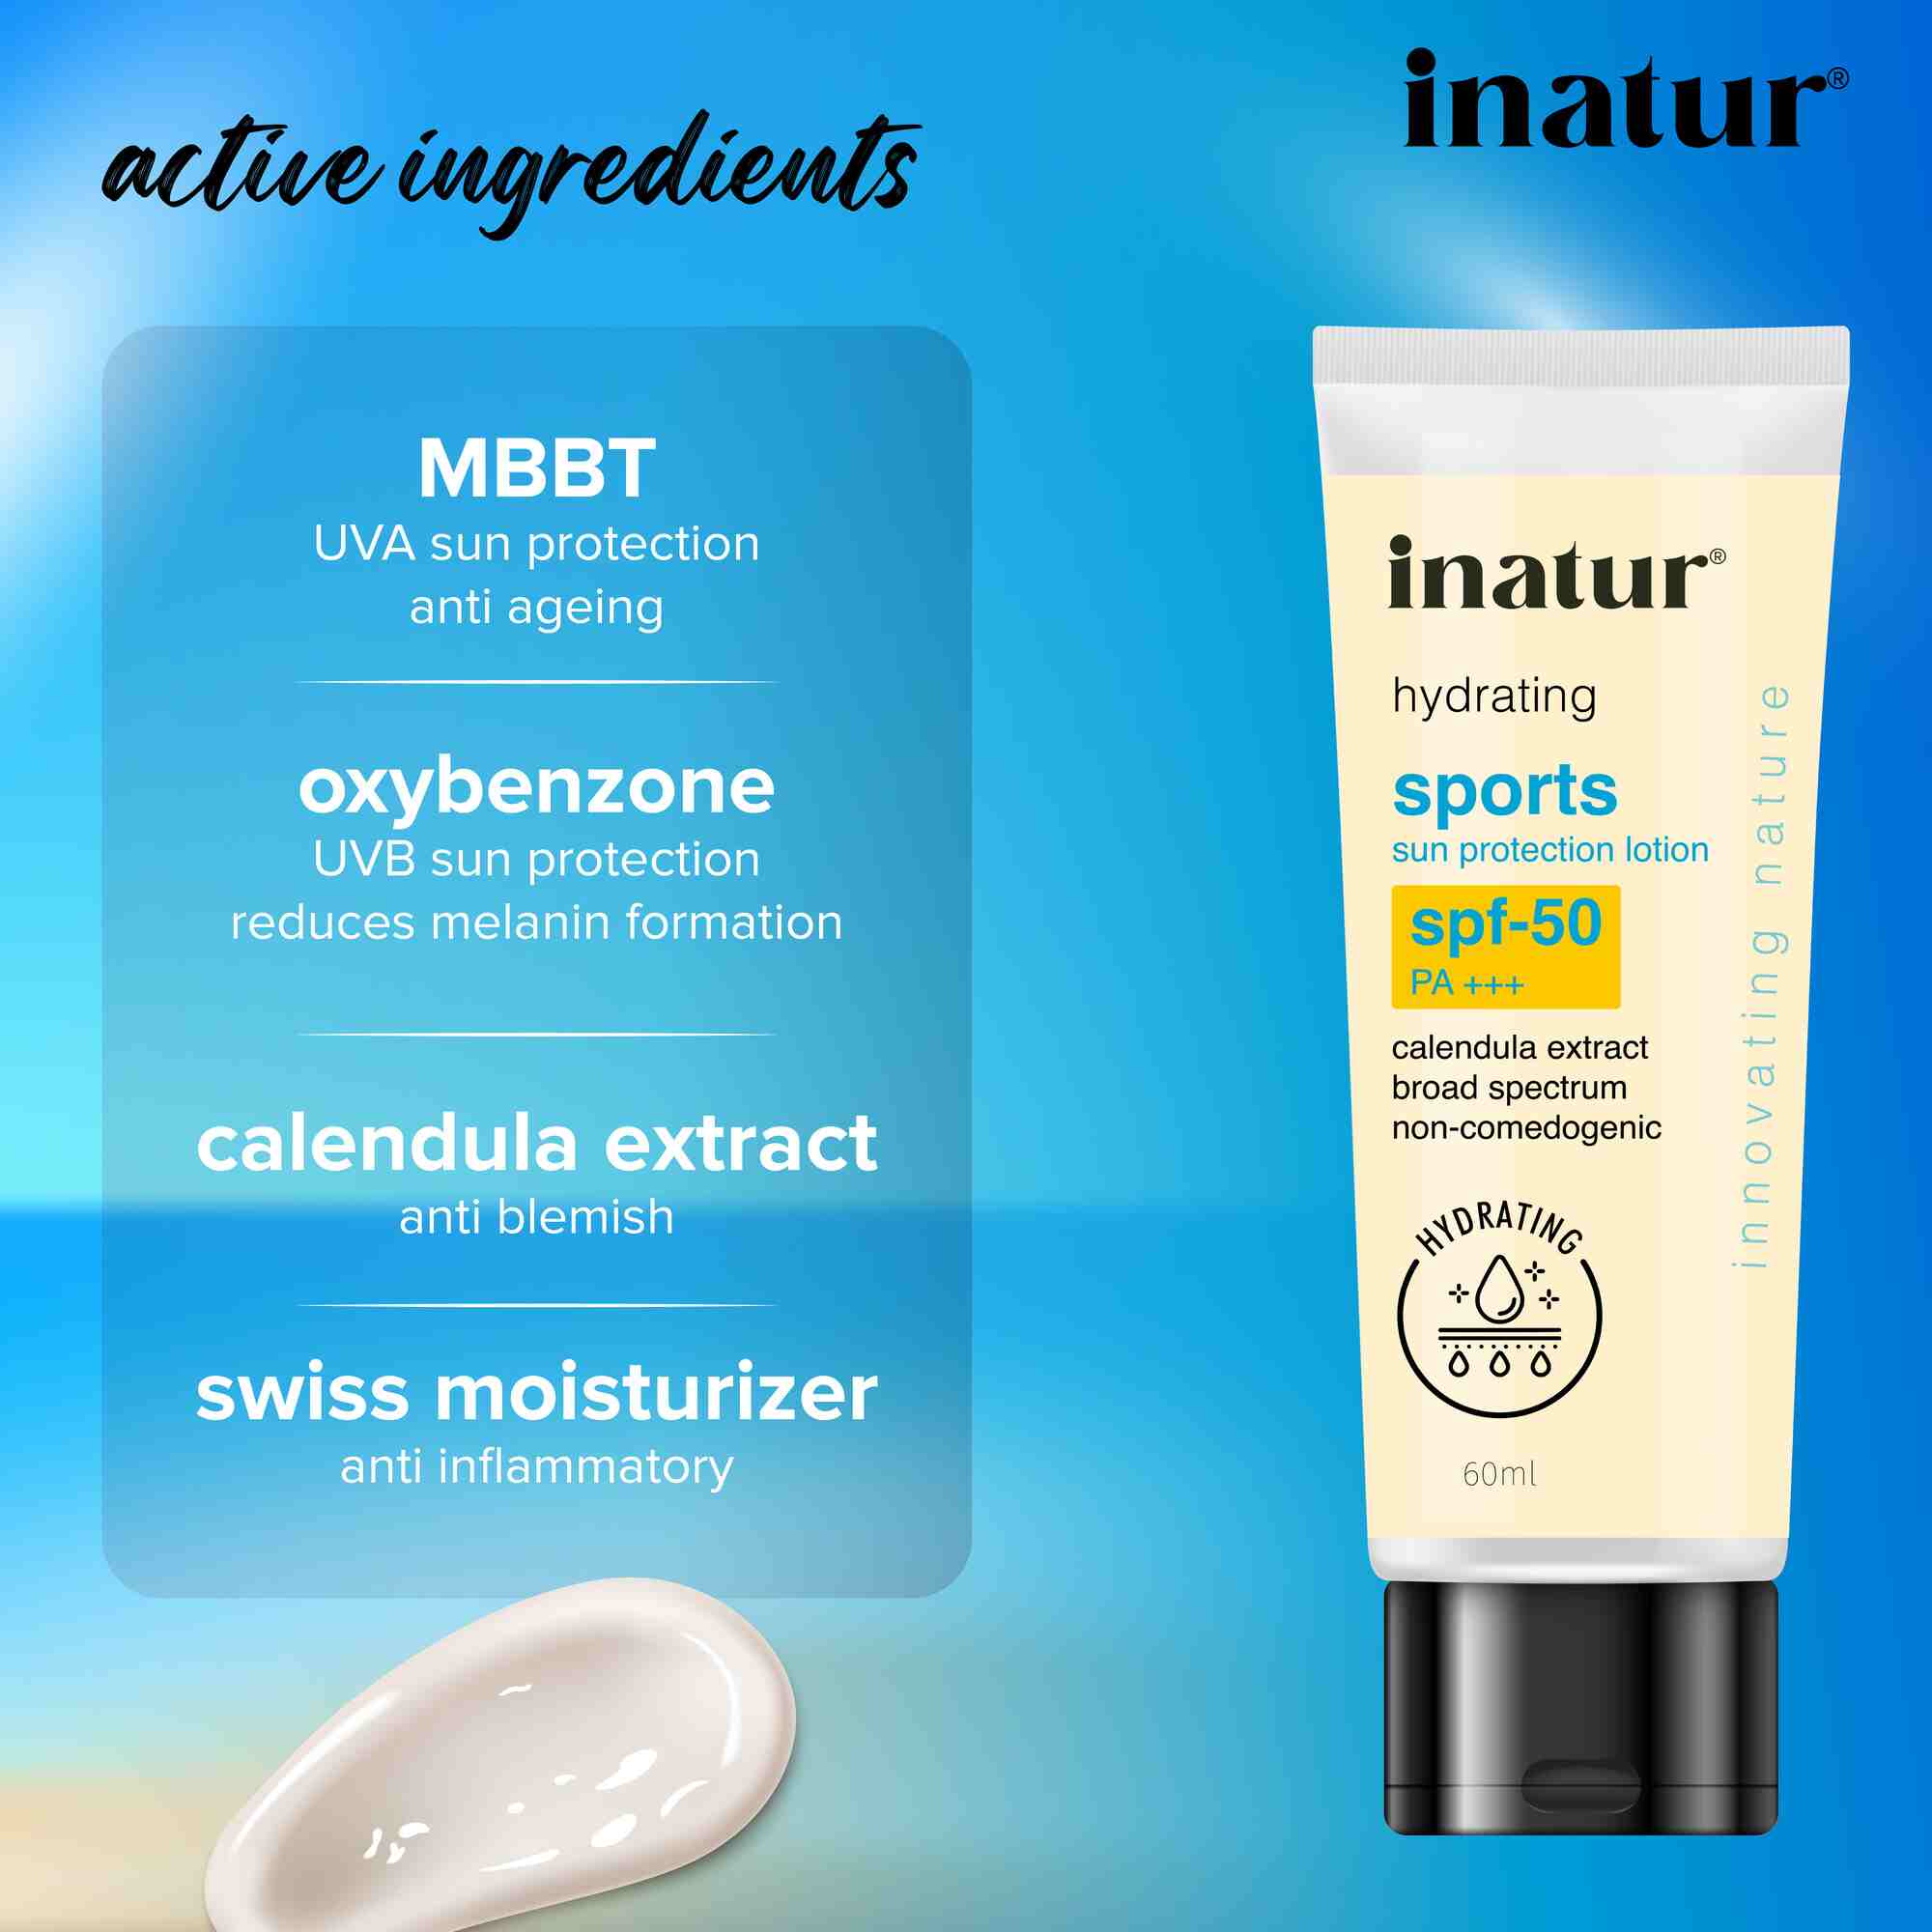 active ingredients of sports sun protection lotion with spf 50